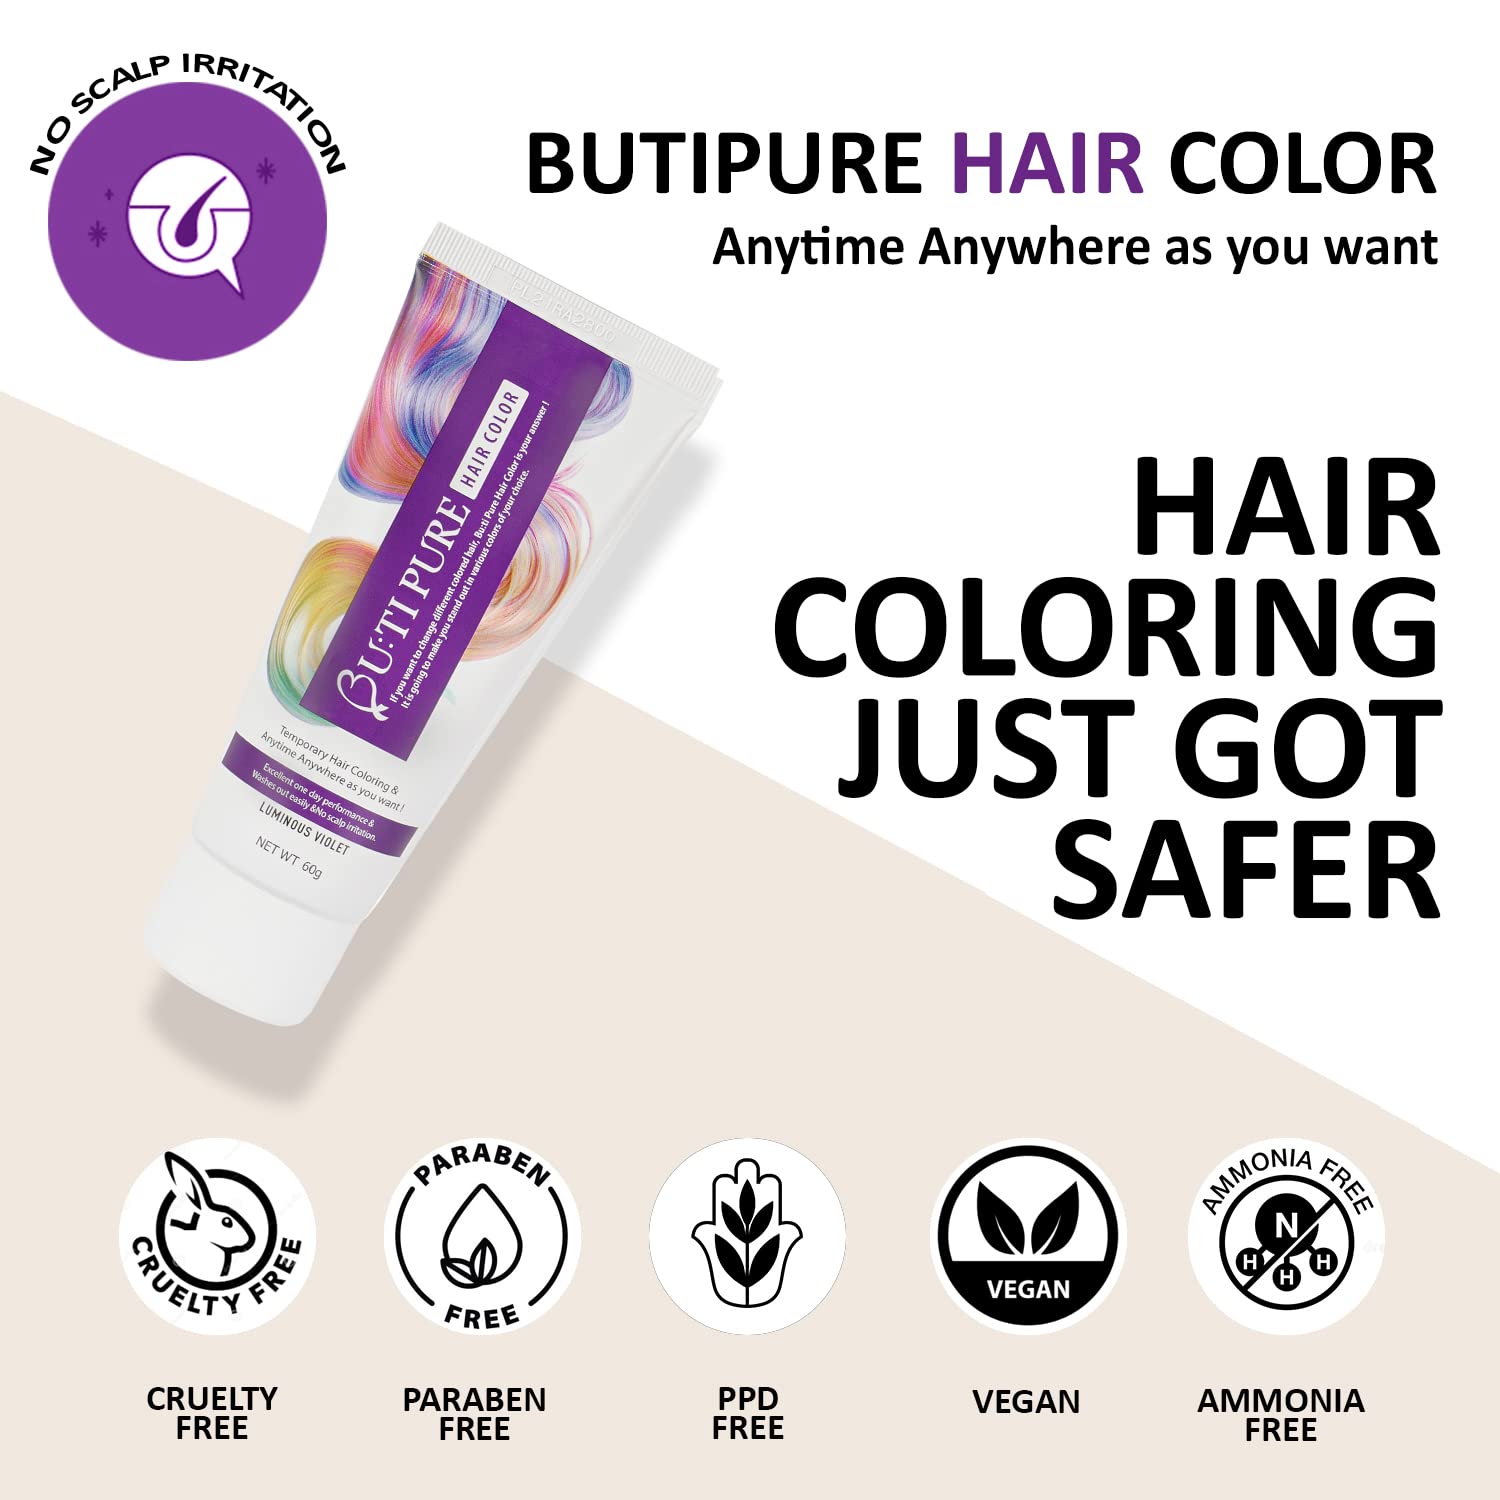 ButiPure Luminous Violet One Day Hair Color (60g) Buti Pure